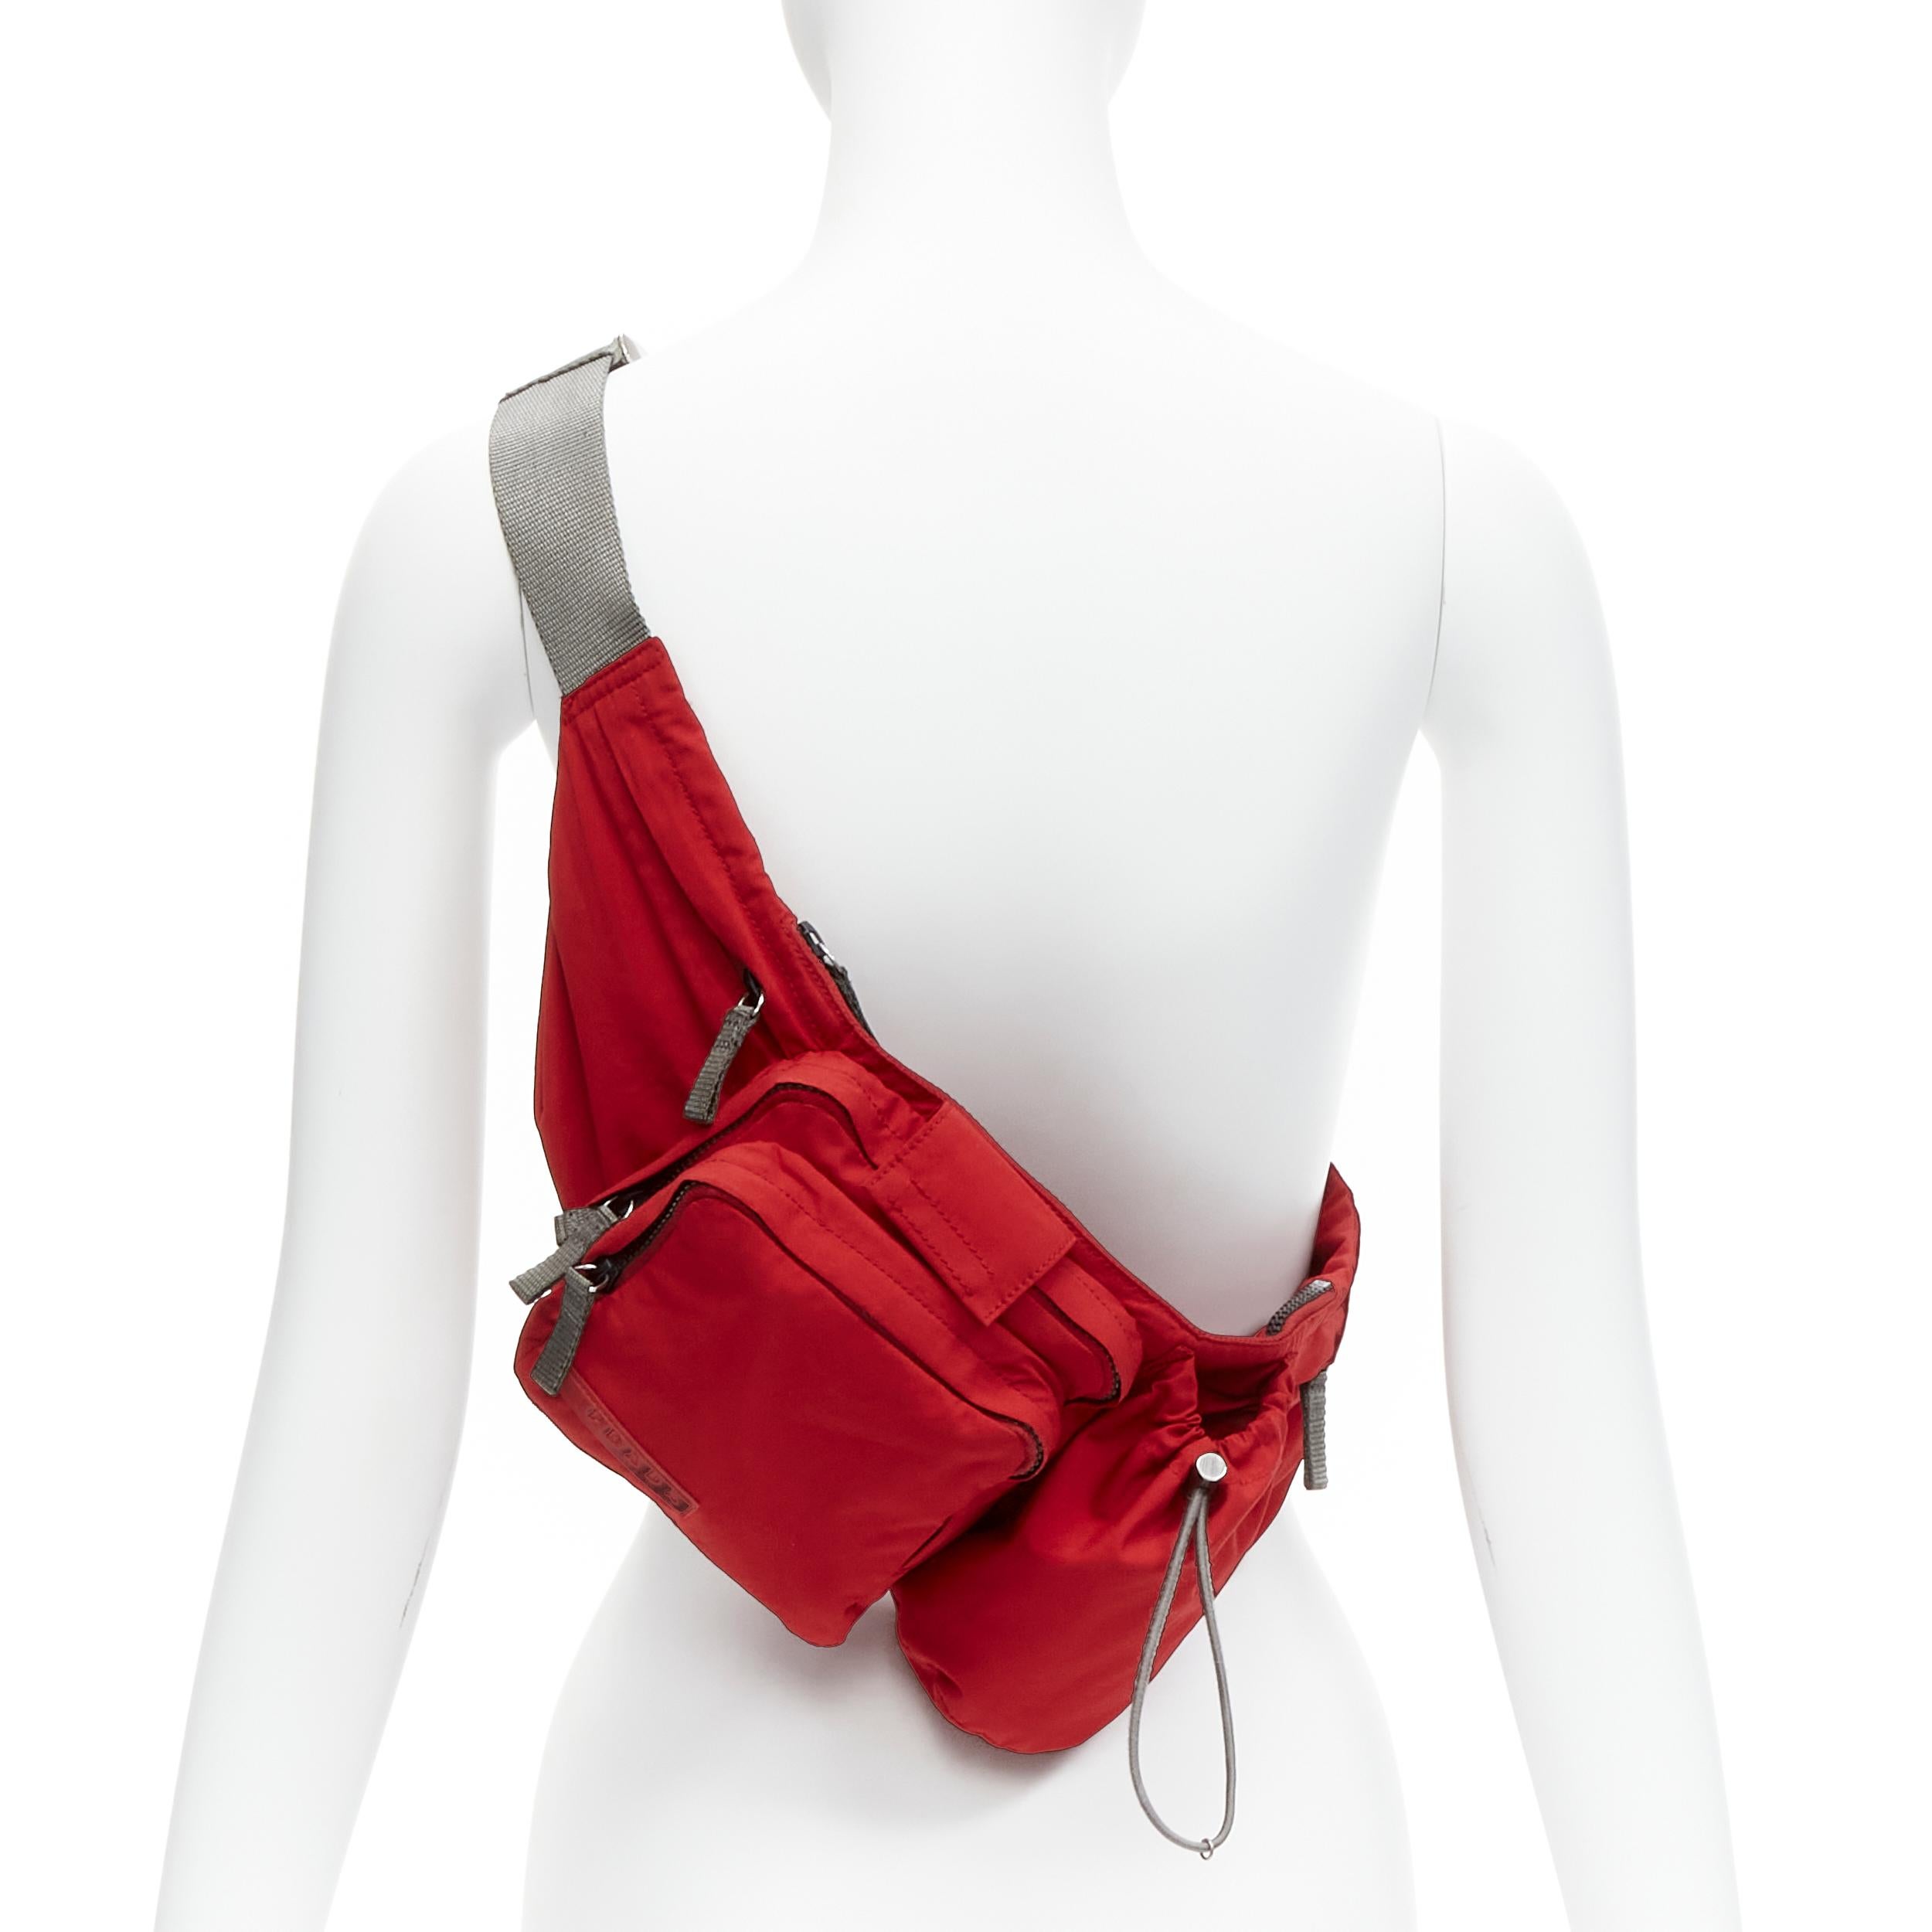 PRADA LINEA ROSSA Vintage red nylon sports tab logo bottle holder waist bag
Reference: TGAS/D00127
Brand: Prada
Designer: Miuccia Prada
Collection: Linea Rossa
Material: Nylon
Color: Red, Grey
Pattern: Solid
Closure: Zip
Lining: Grey Fabric
Made in: